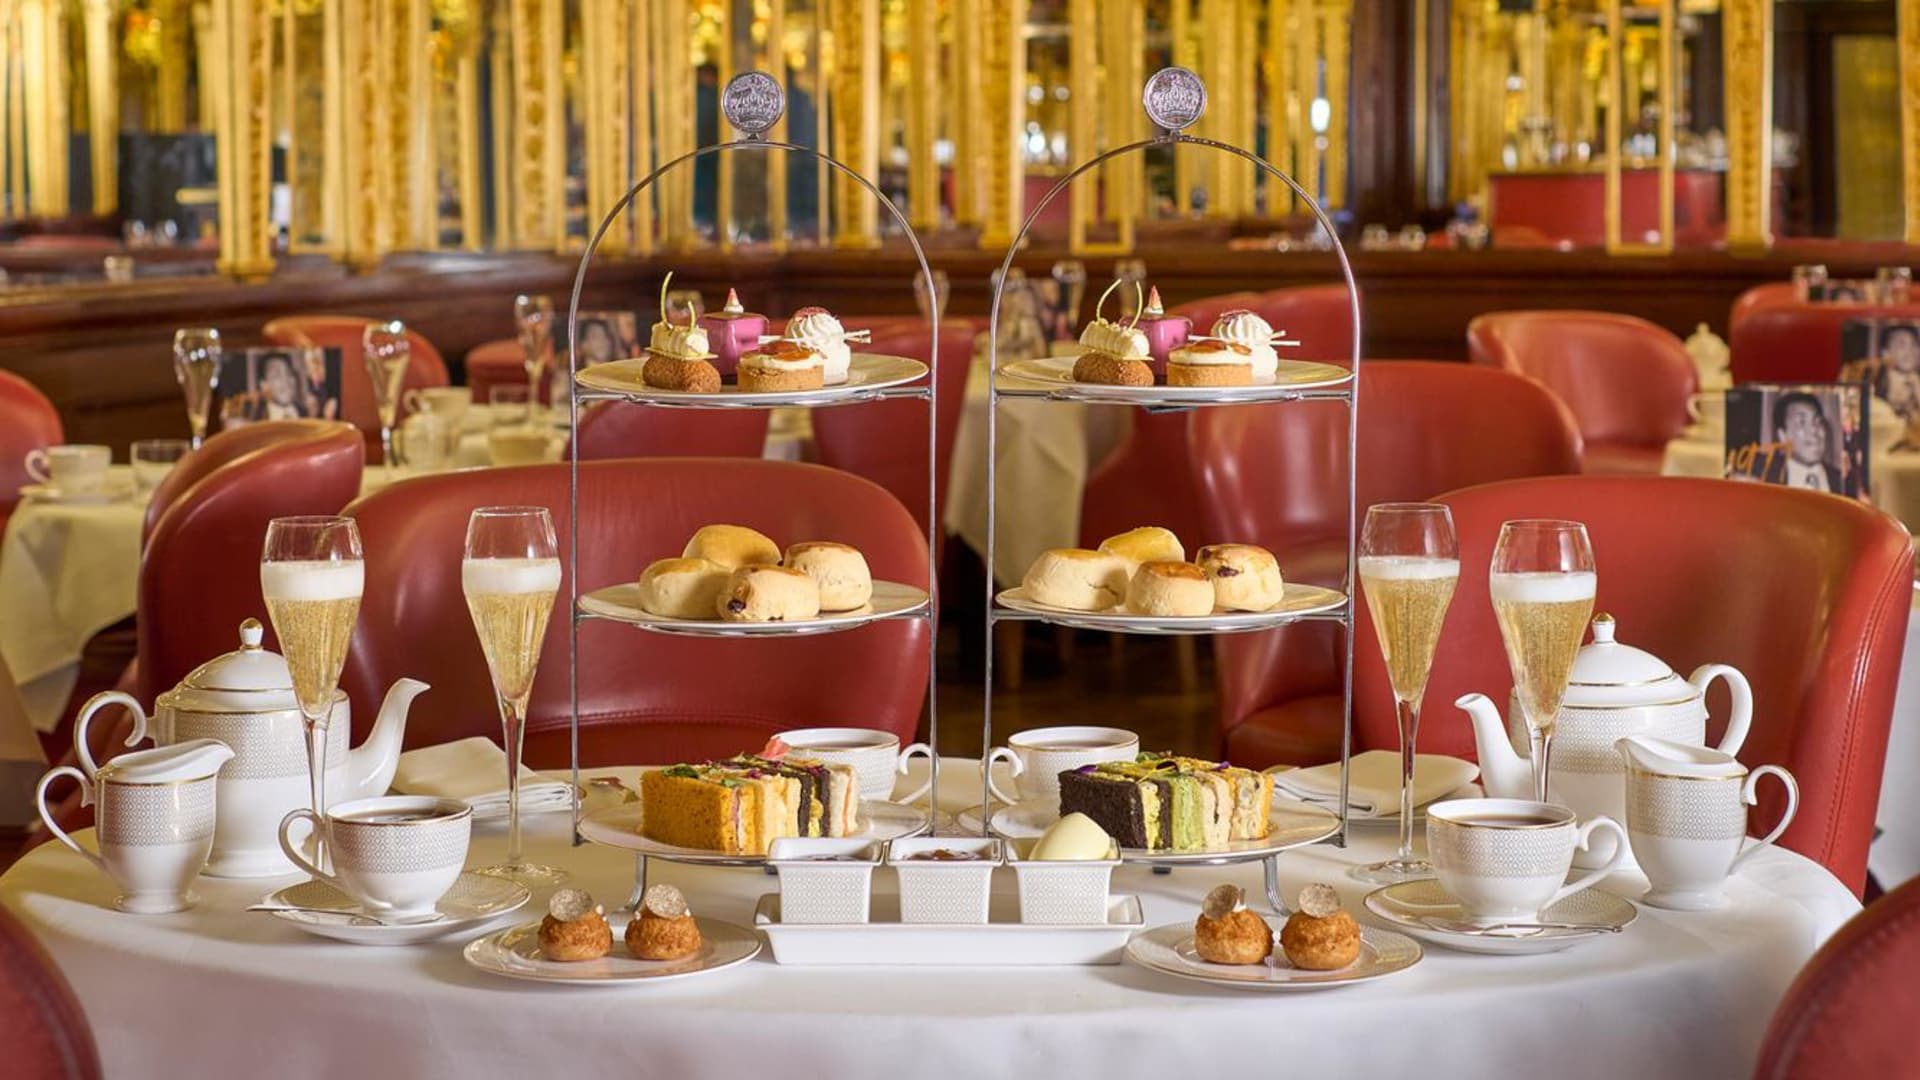 A range of London hotels are offering coronation experiences, including afternoon tea and exclusive tours, to give guests a taste of the royal high life.